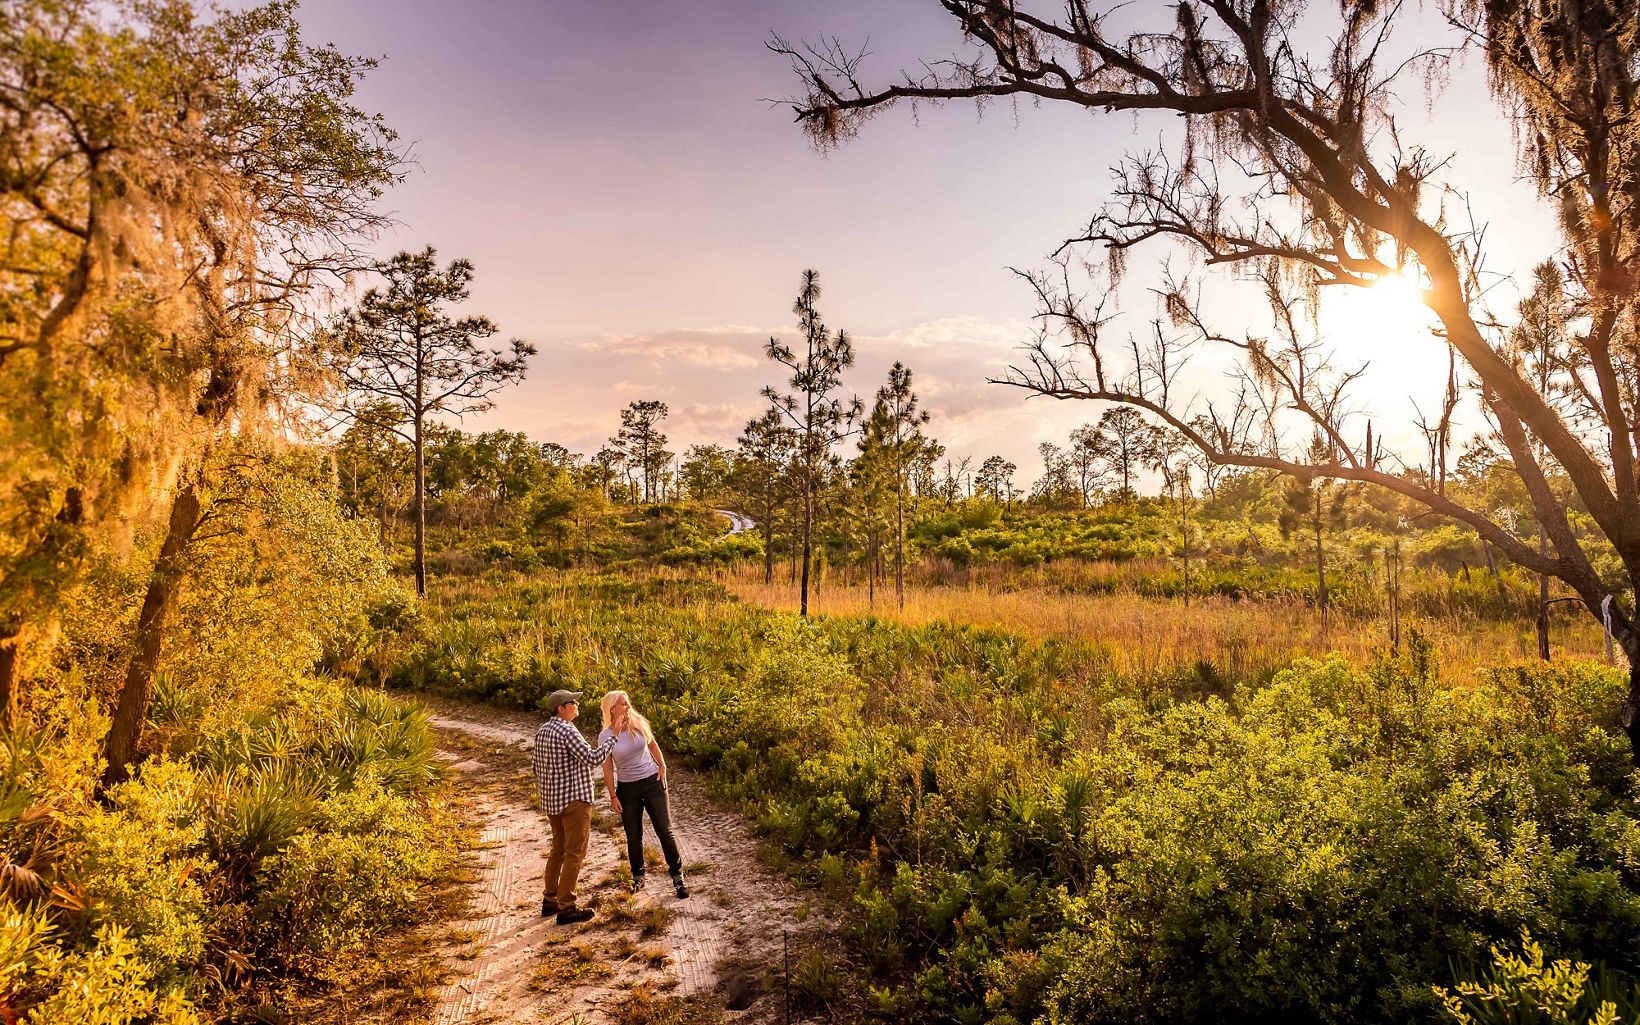 Two hikers enjoy a trail through trees and shrubs at Tiger Creek Preserve during sunset.